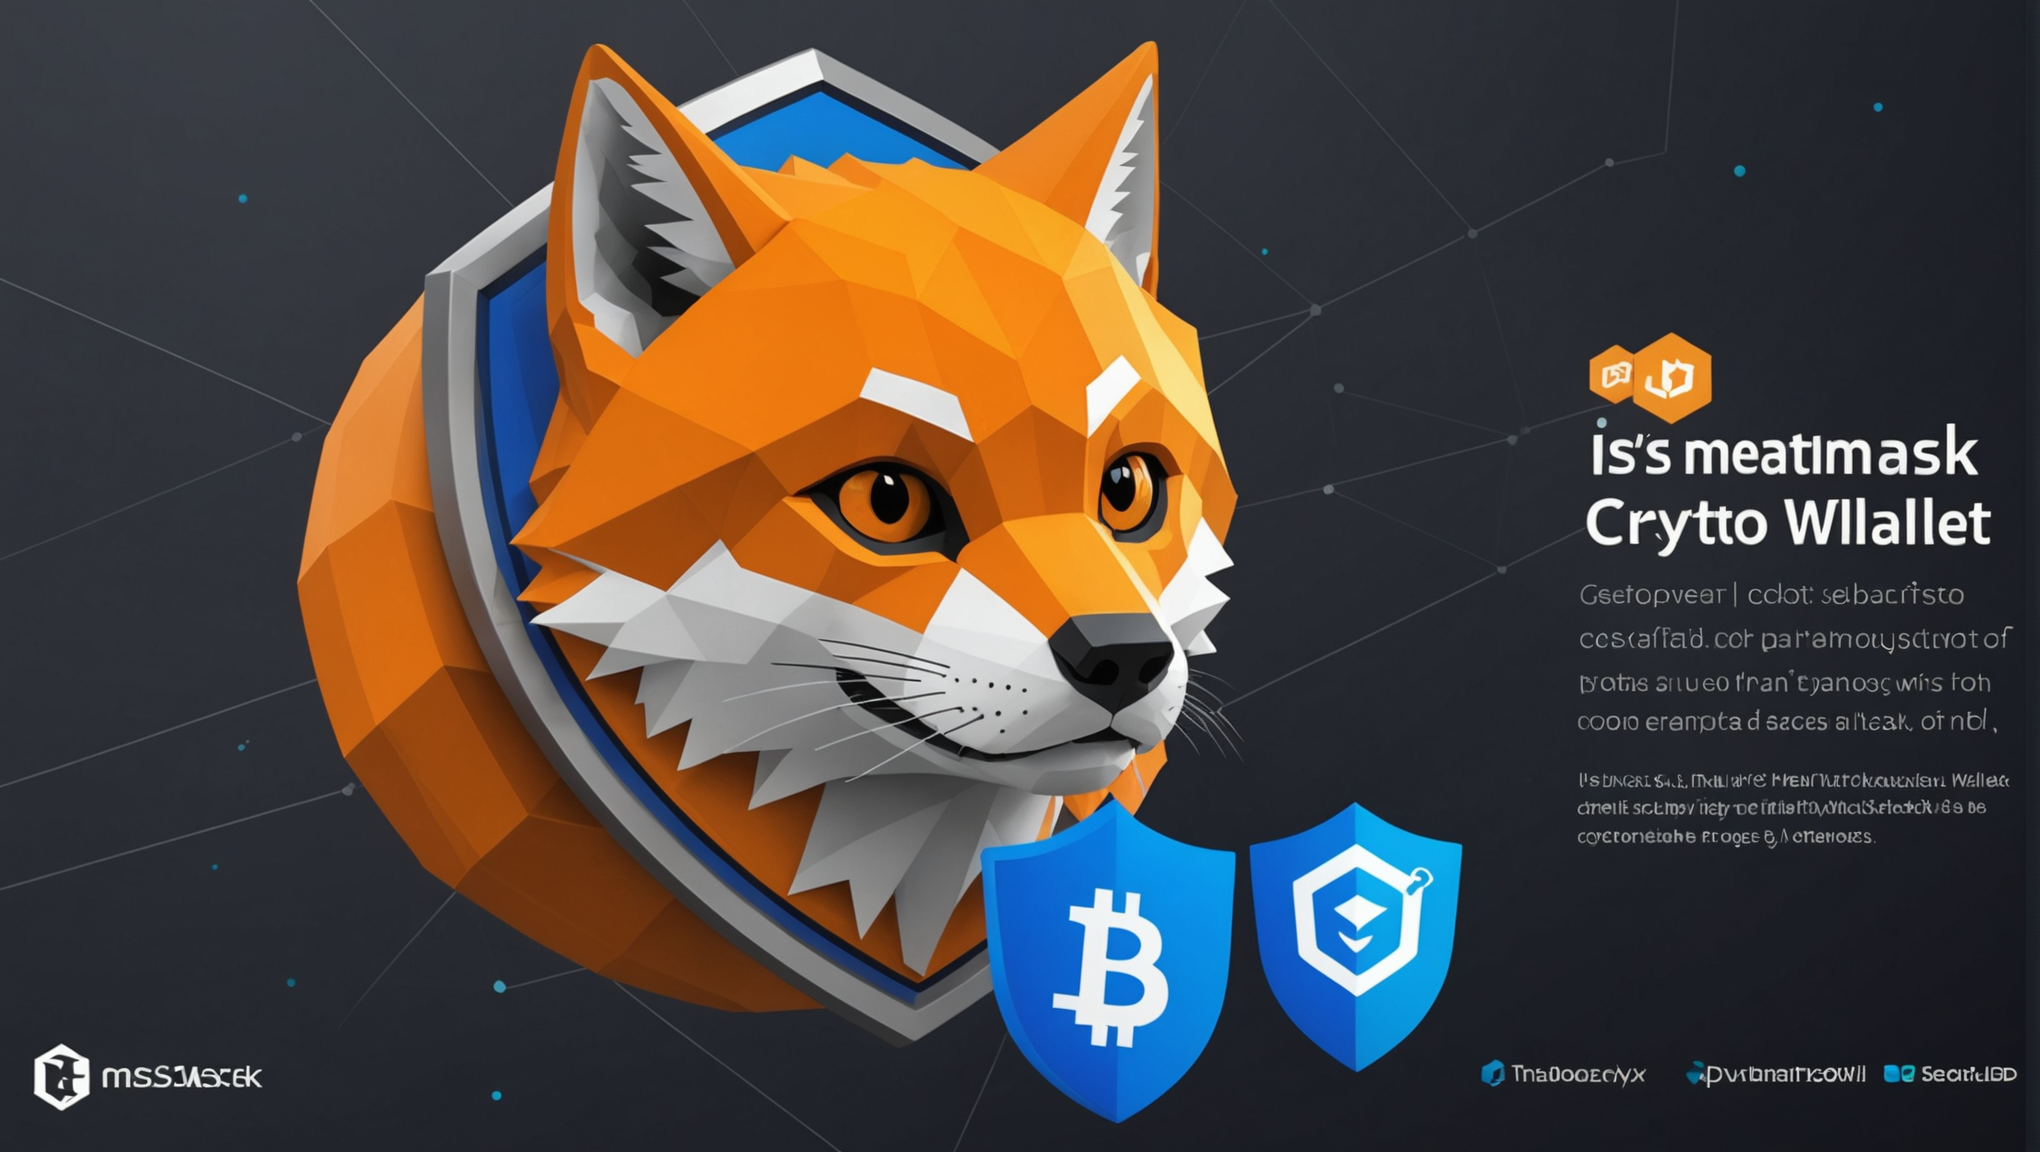 learn about the latest news of consensys acquiring wallet guard to increase the security of metamask, the leading crypto wallet in the market.